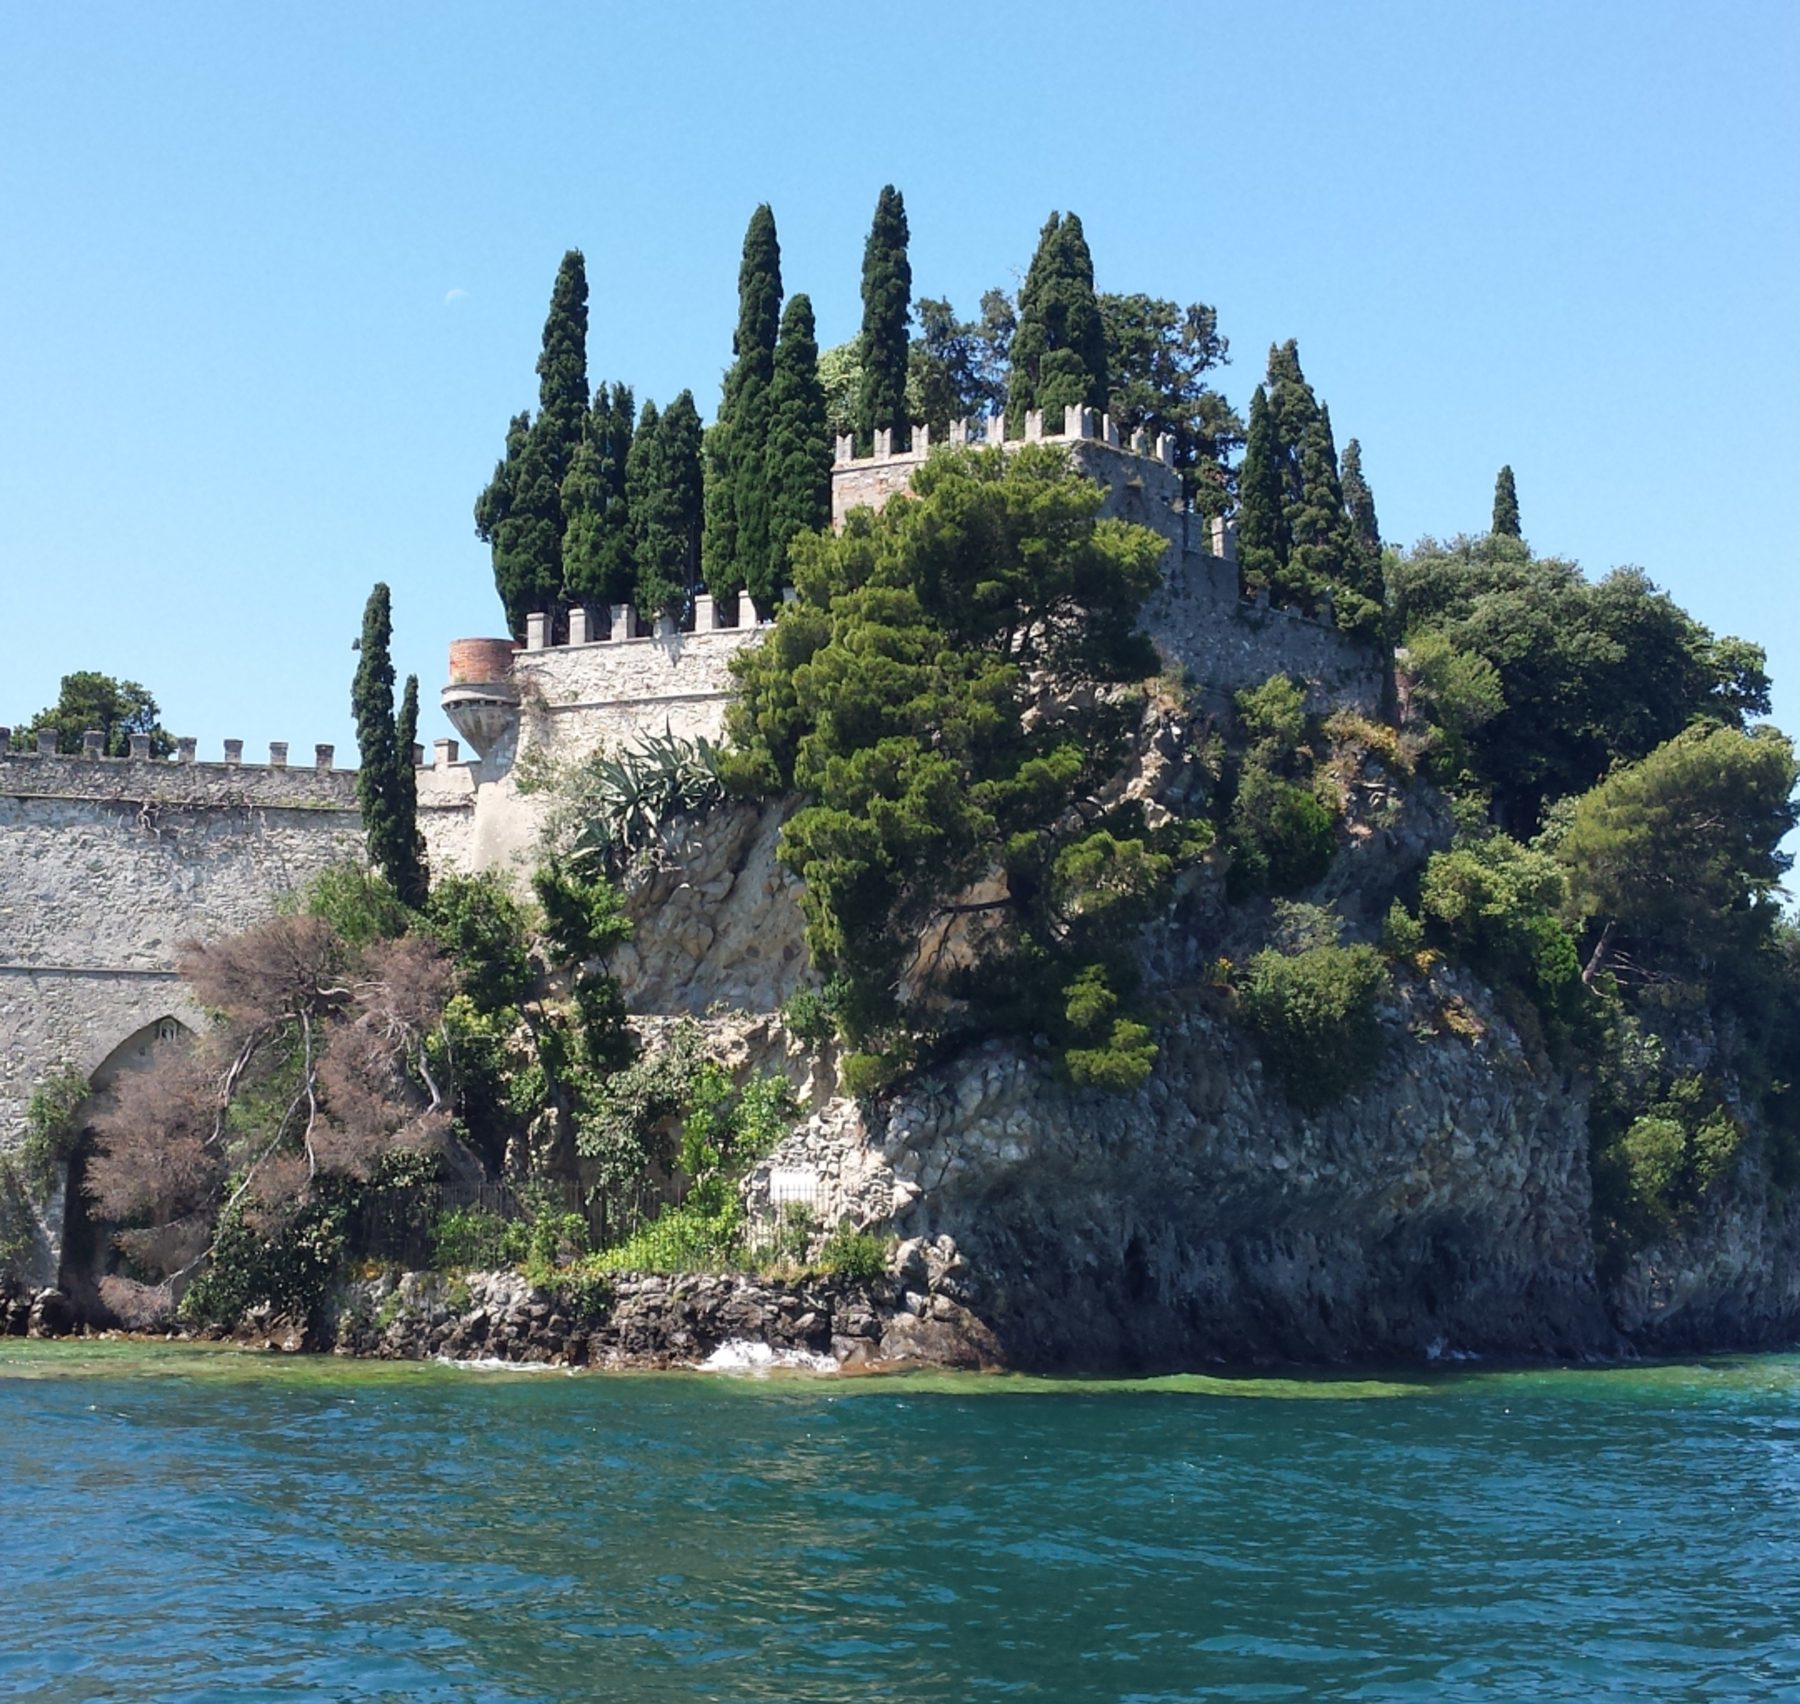 Stunning Lake Garda is a feast for the eyes.